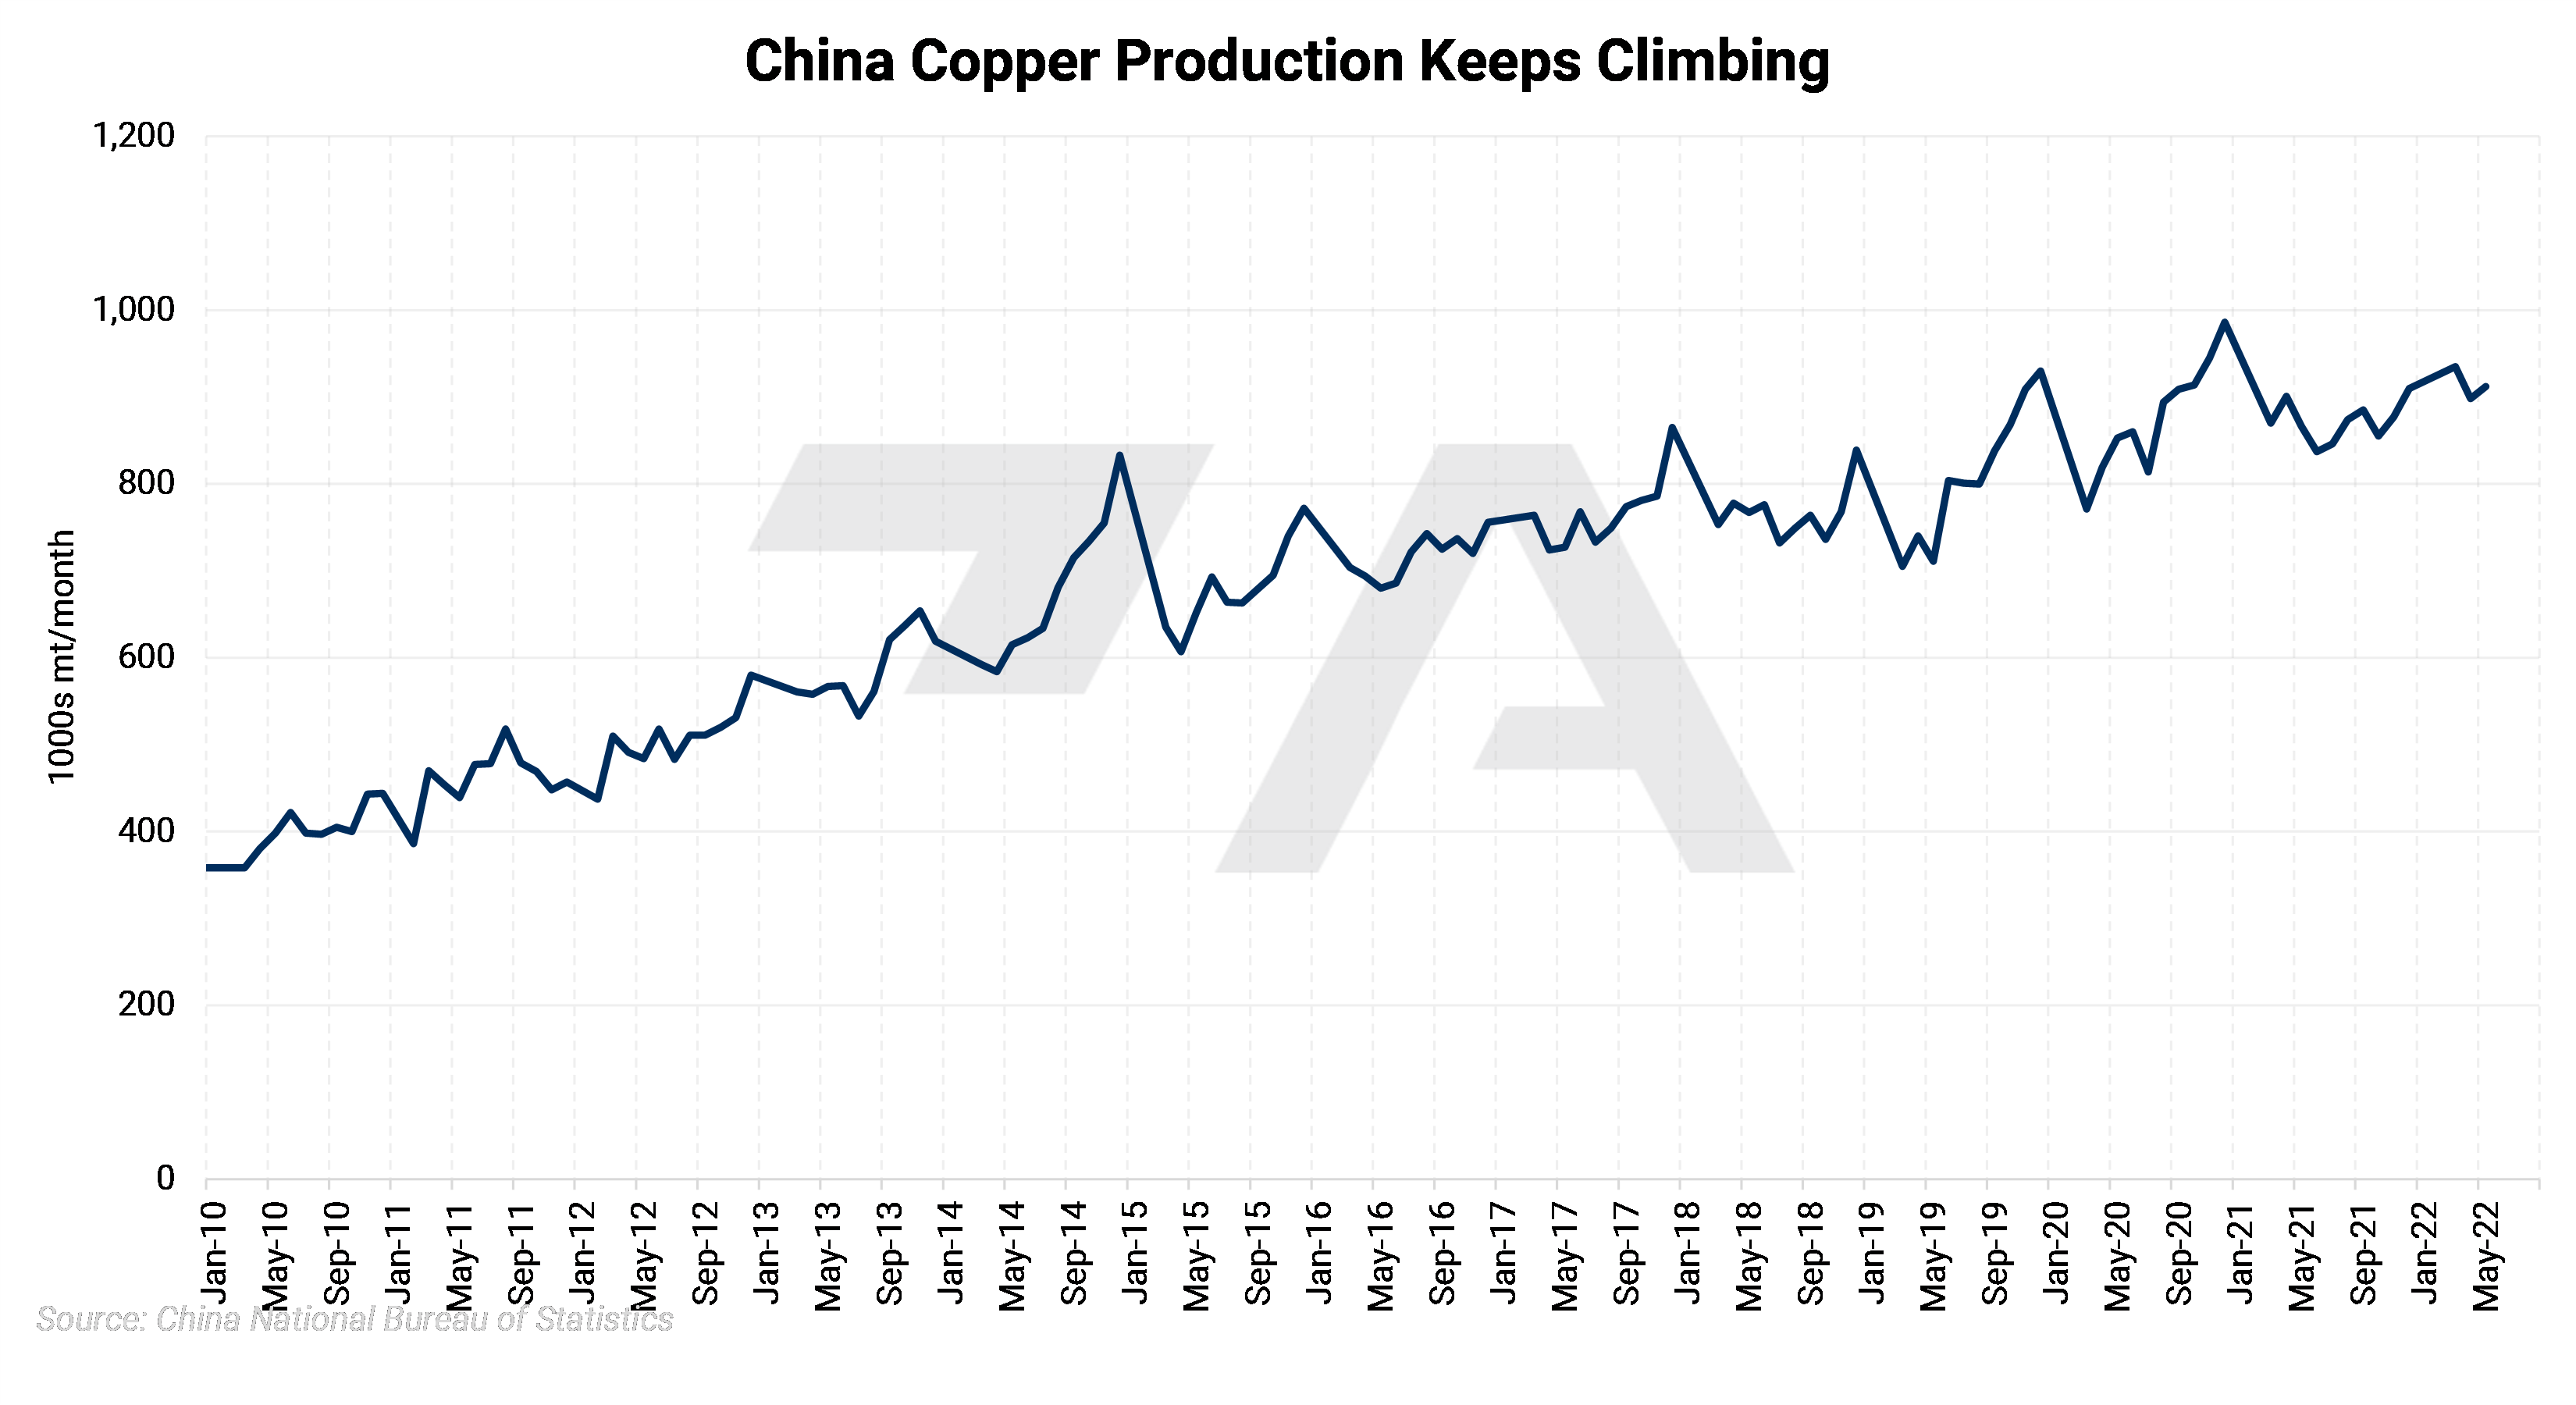 Copper prices fall to lowest point since spring